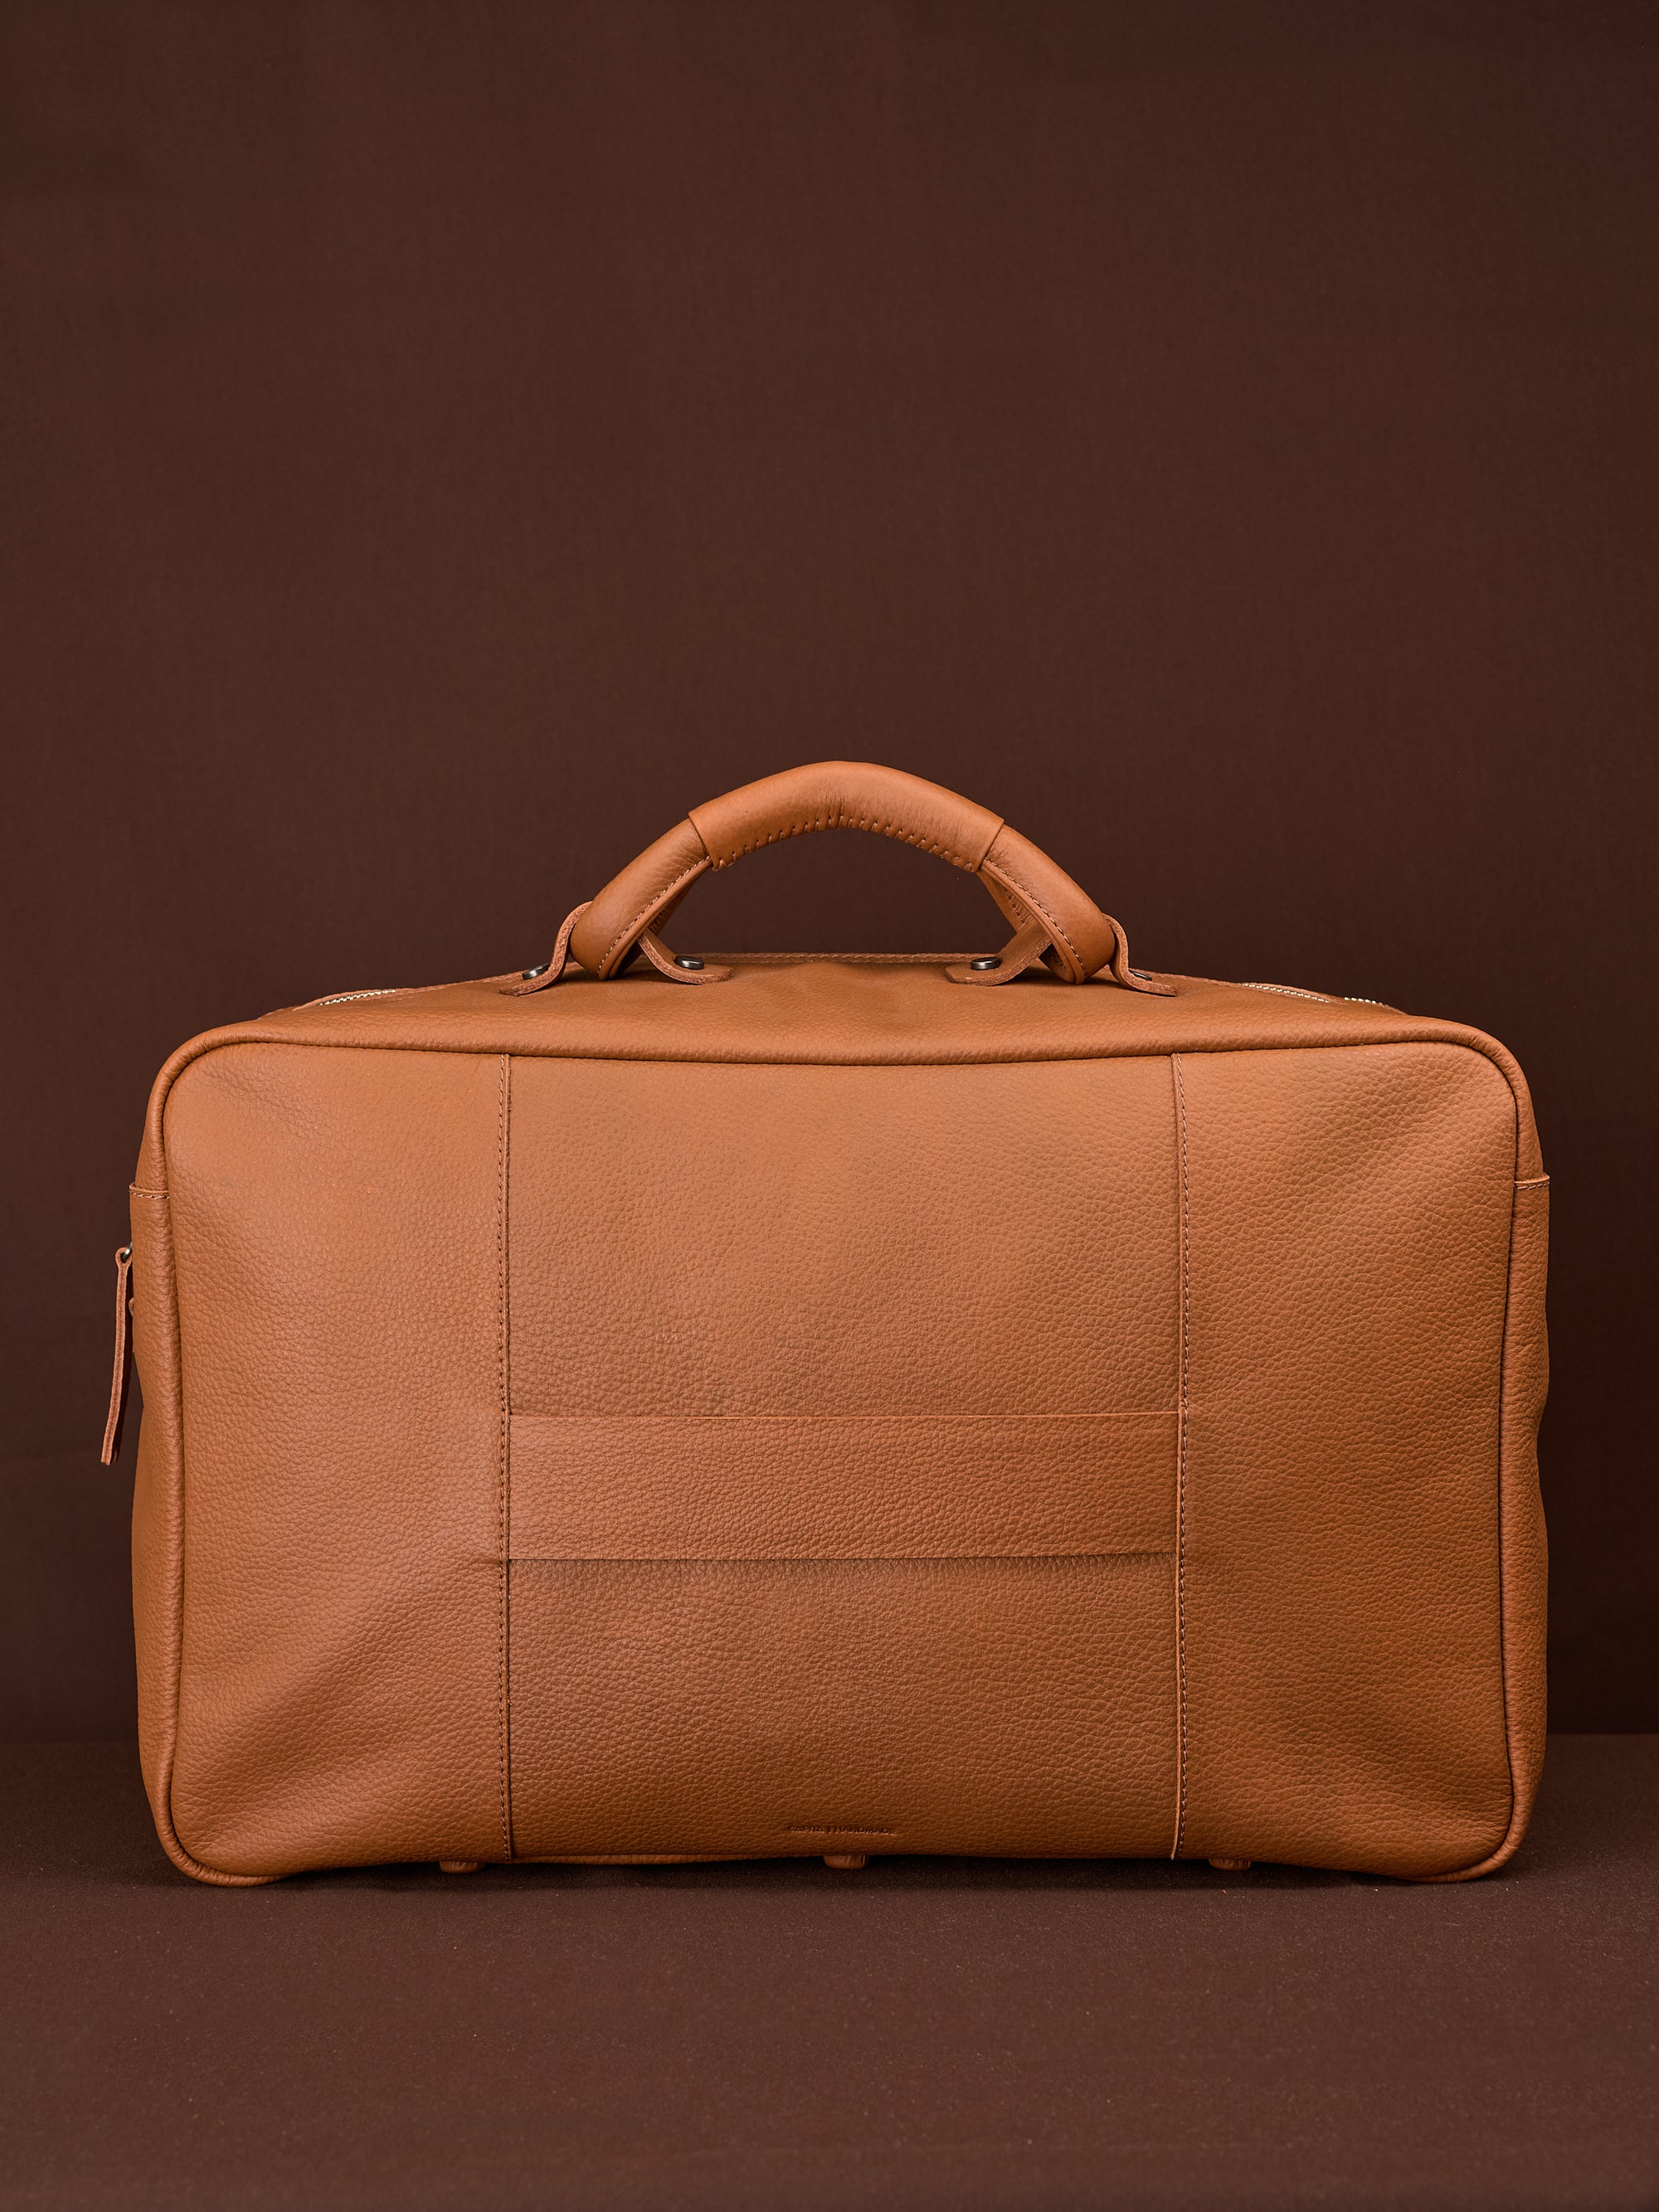 Luggage Strap. Leather Weekend Bag Tan by Capra